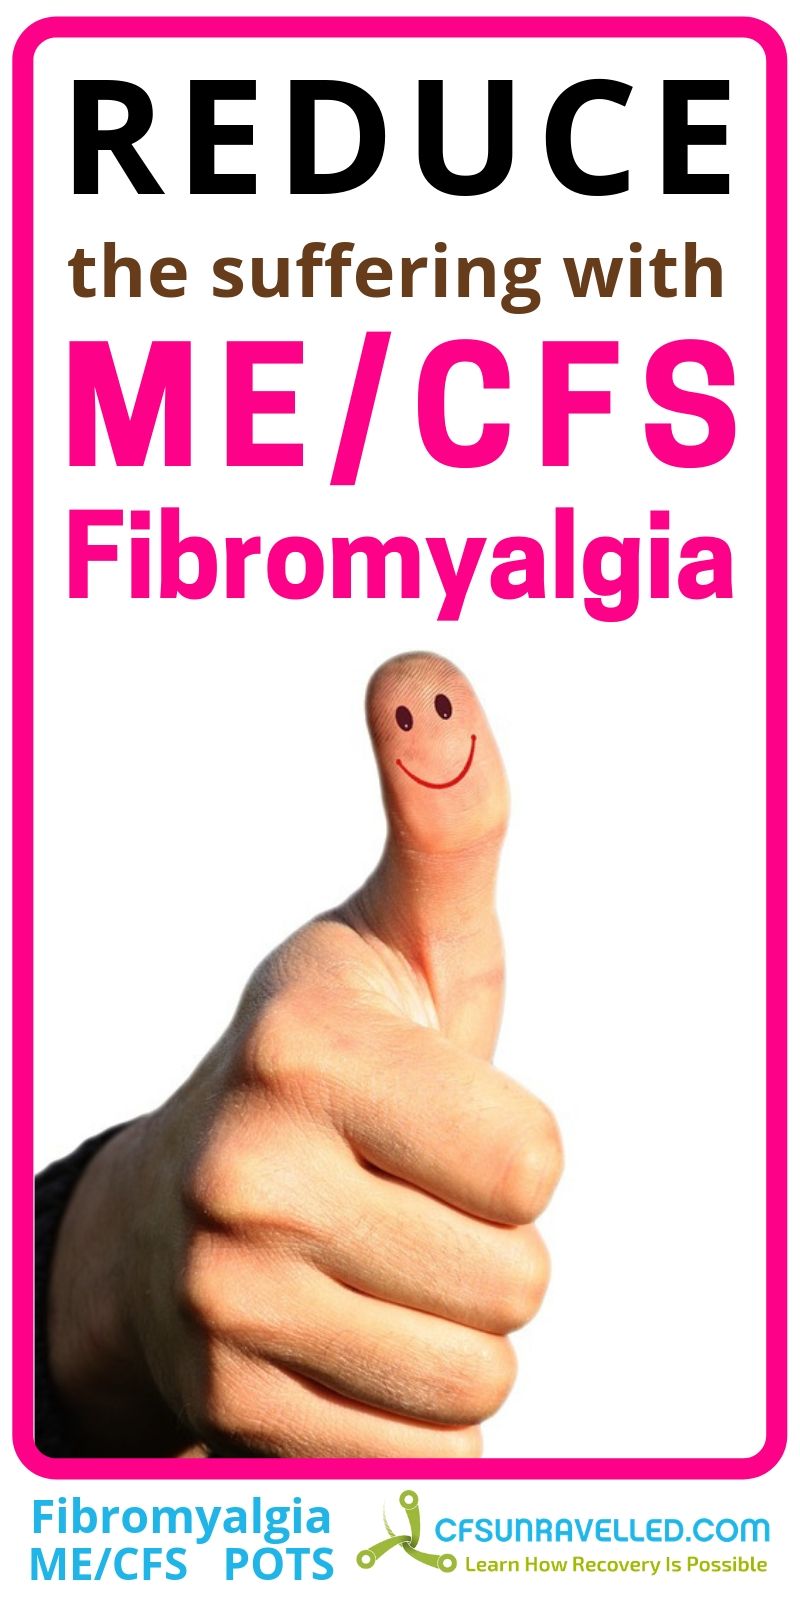 poster about reducing suffering with mecfs fibromyalgia with picture of thumbs up